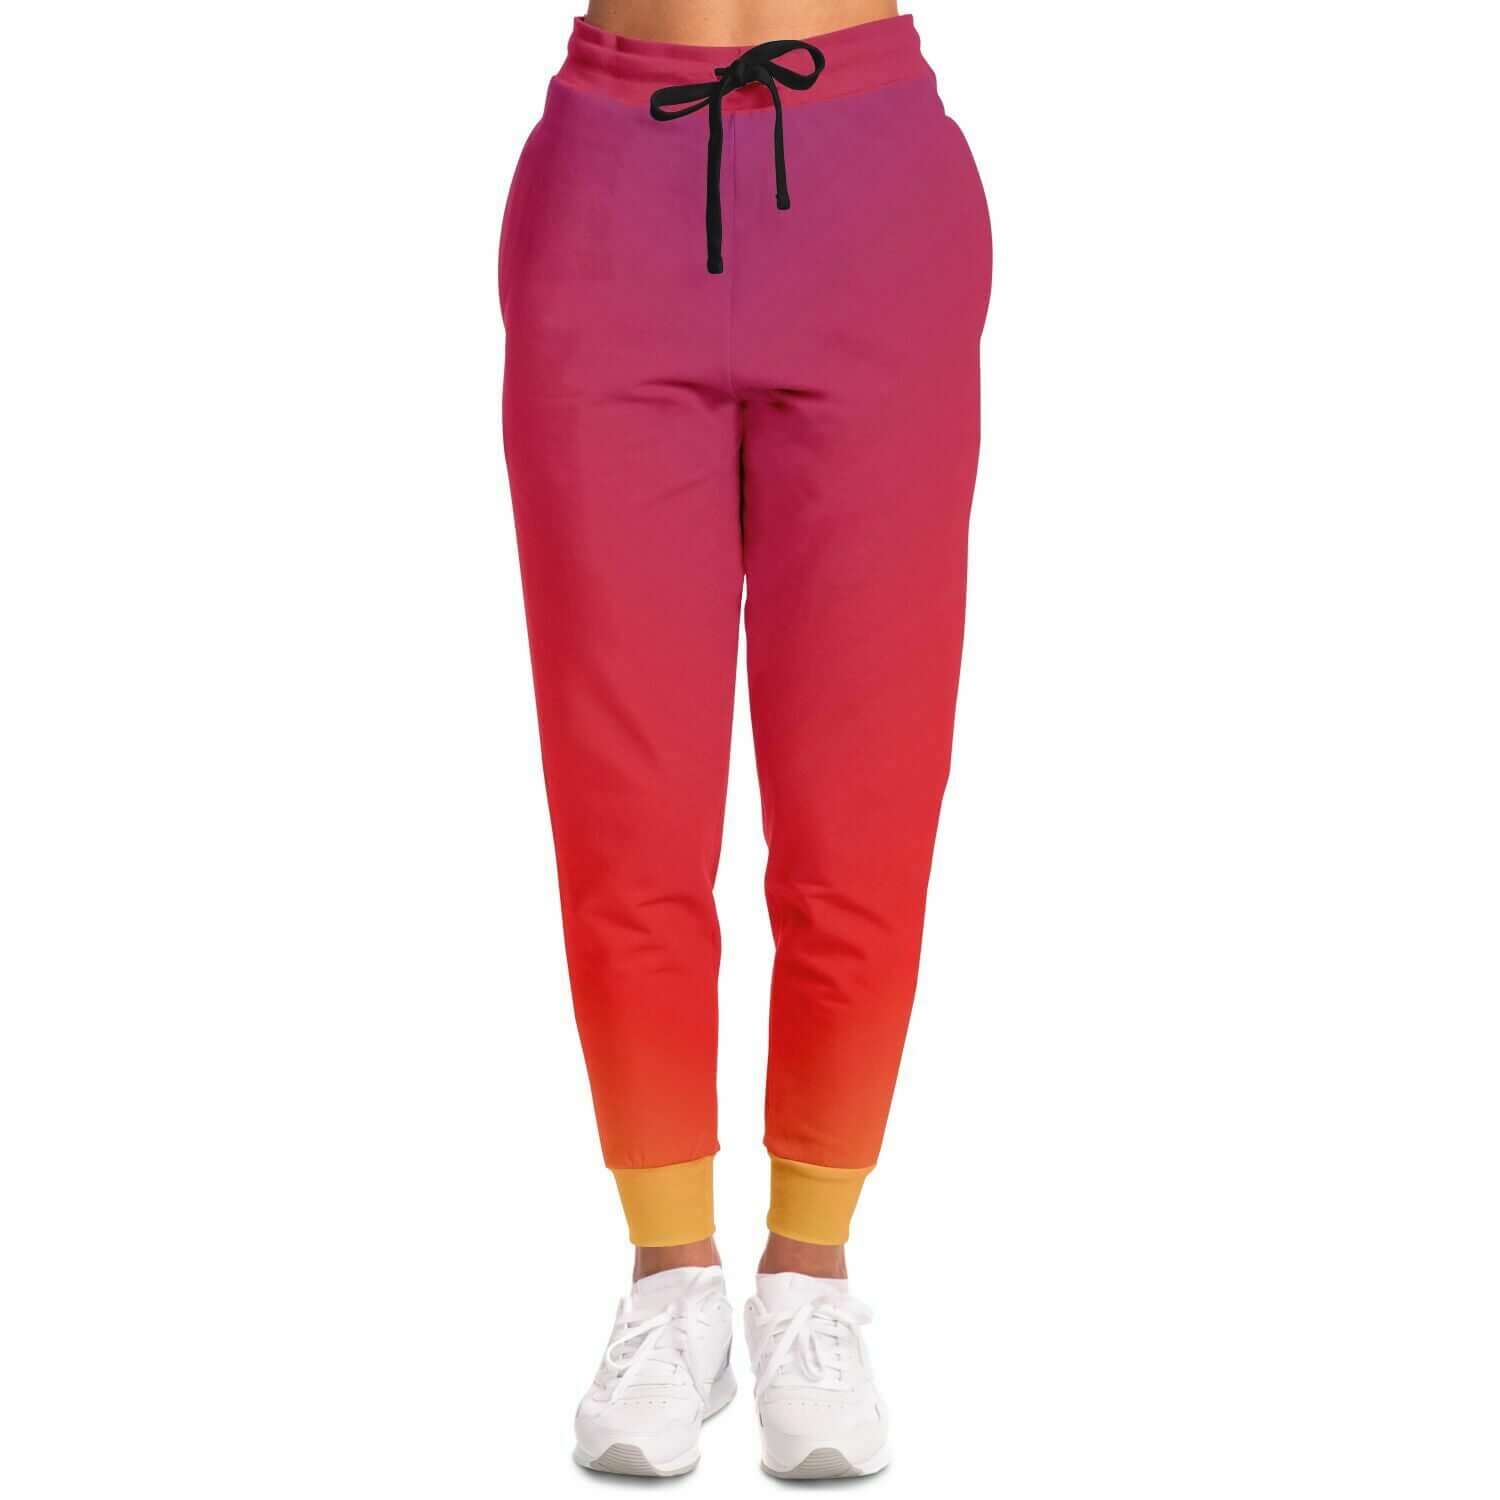 Athletic Joggers HD | Gradient | Shipping Included - Ribooa